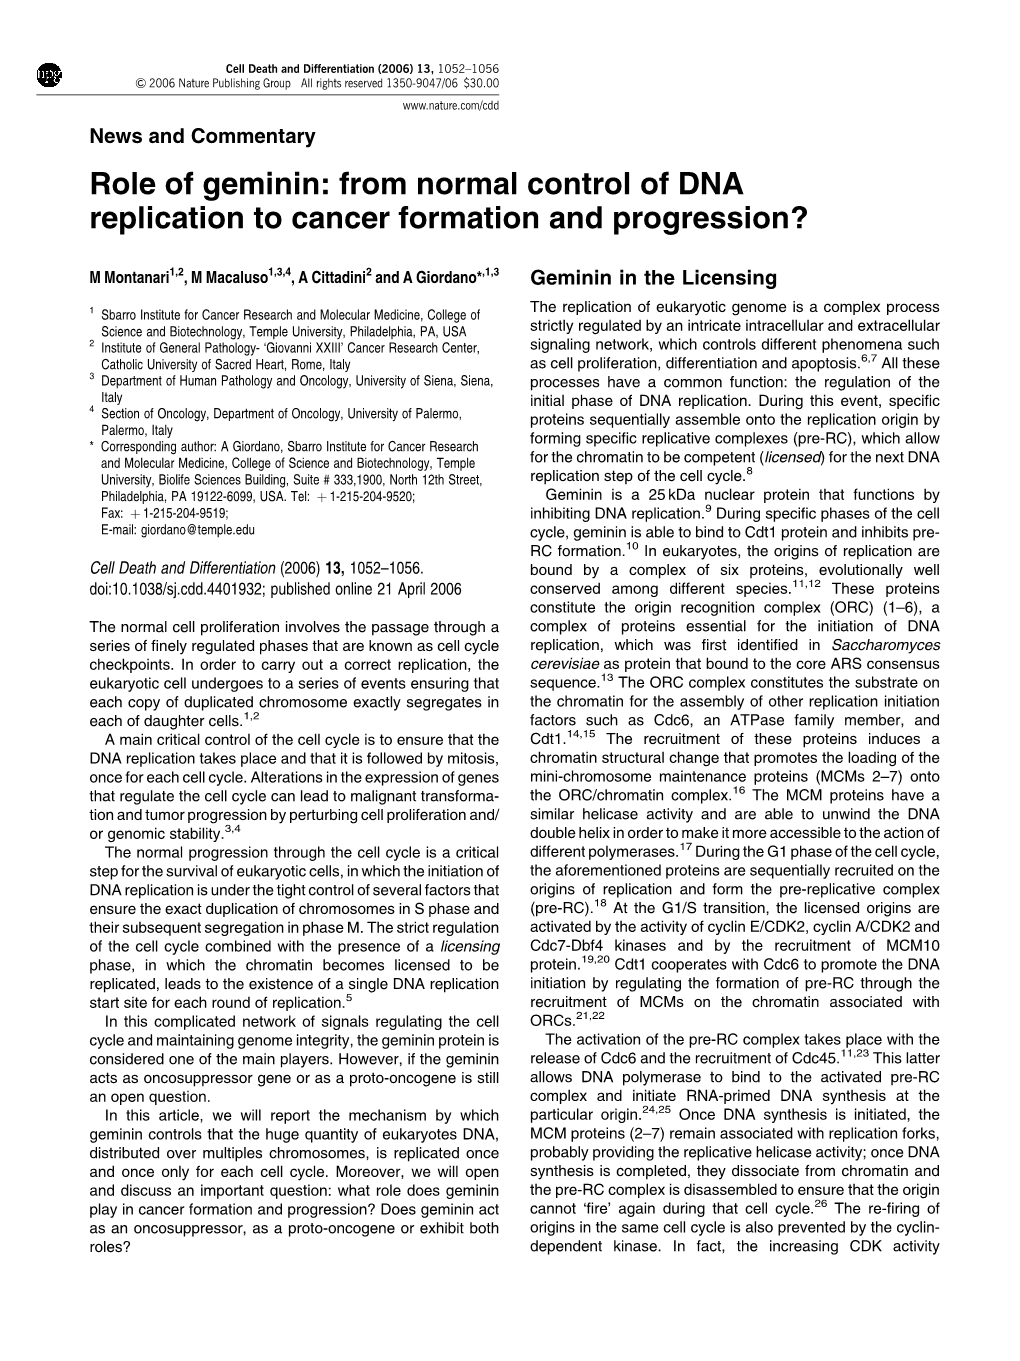 Role of Geminin: from Normal Control of DNA Replication to Cancer Formation and Progression?